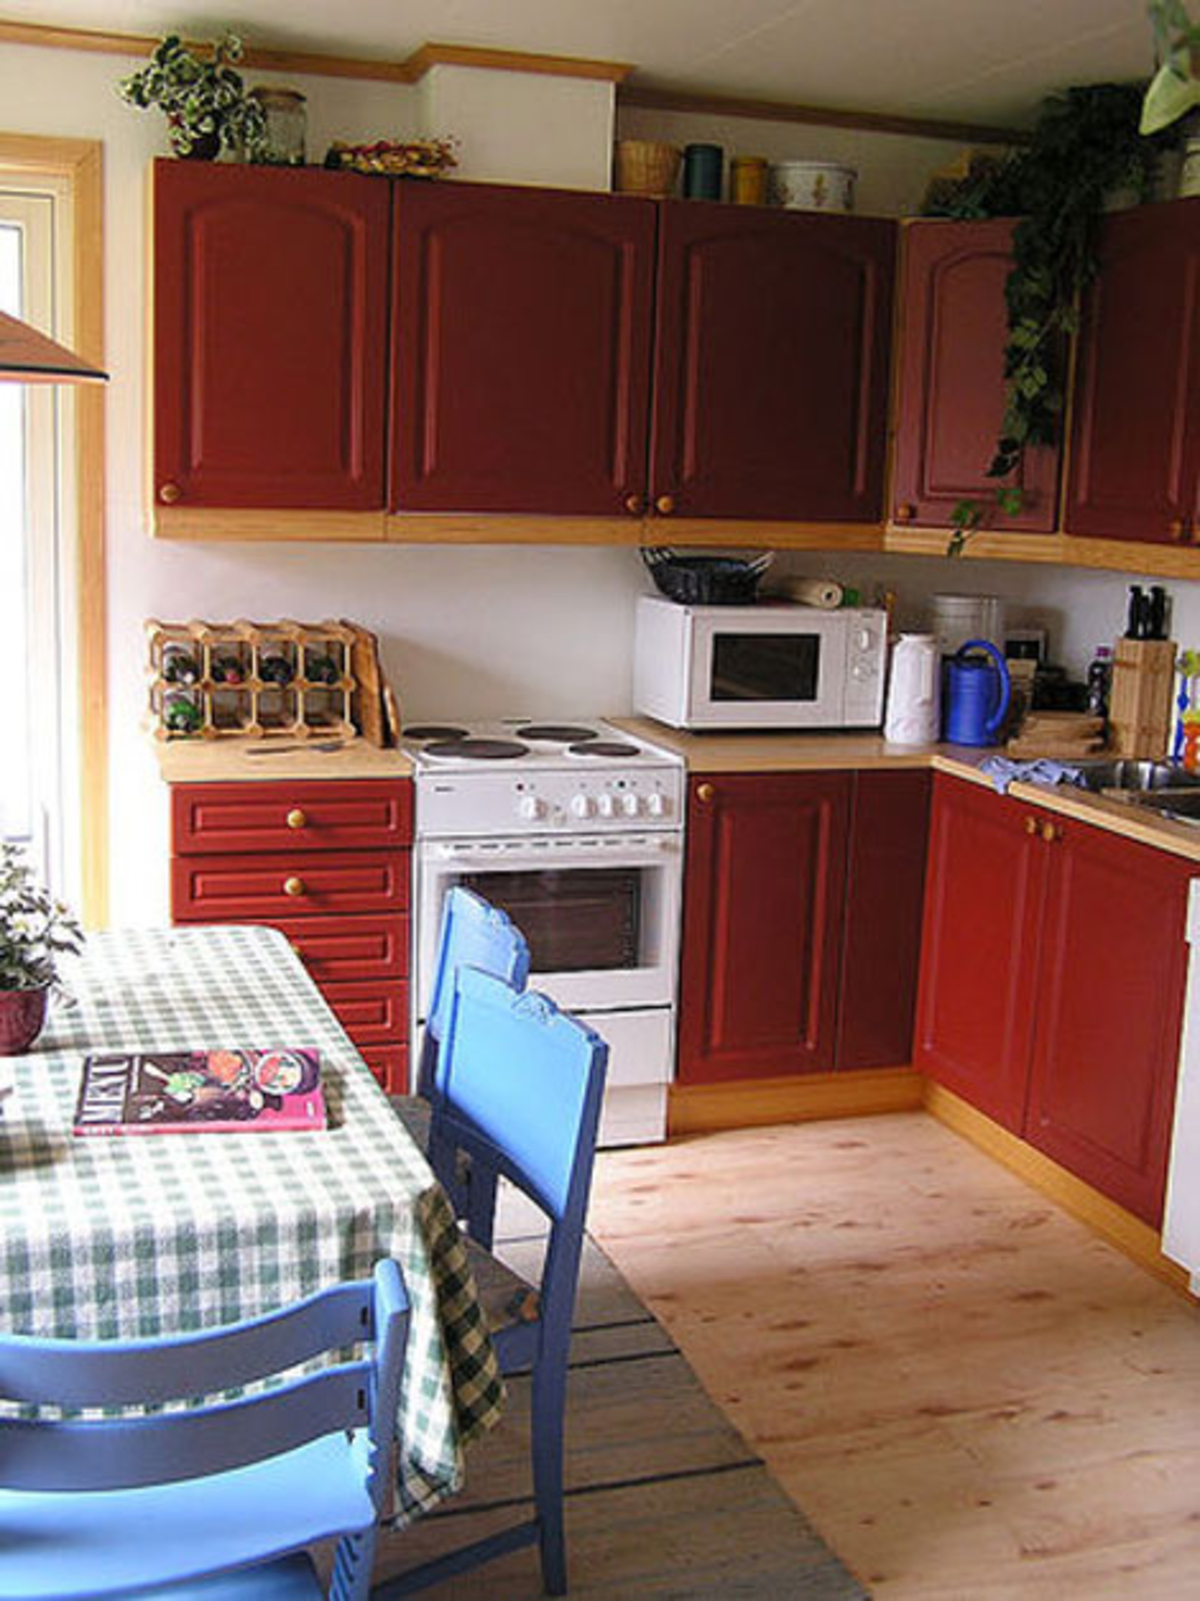 Strong colours and flowers over the cupboards. Photo: Maihaugen.

